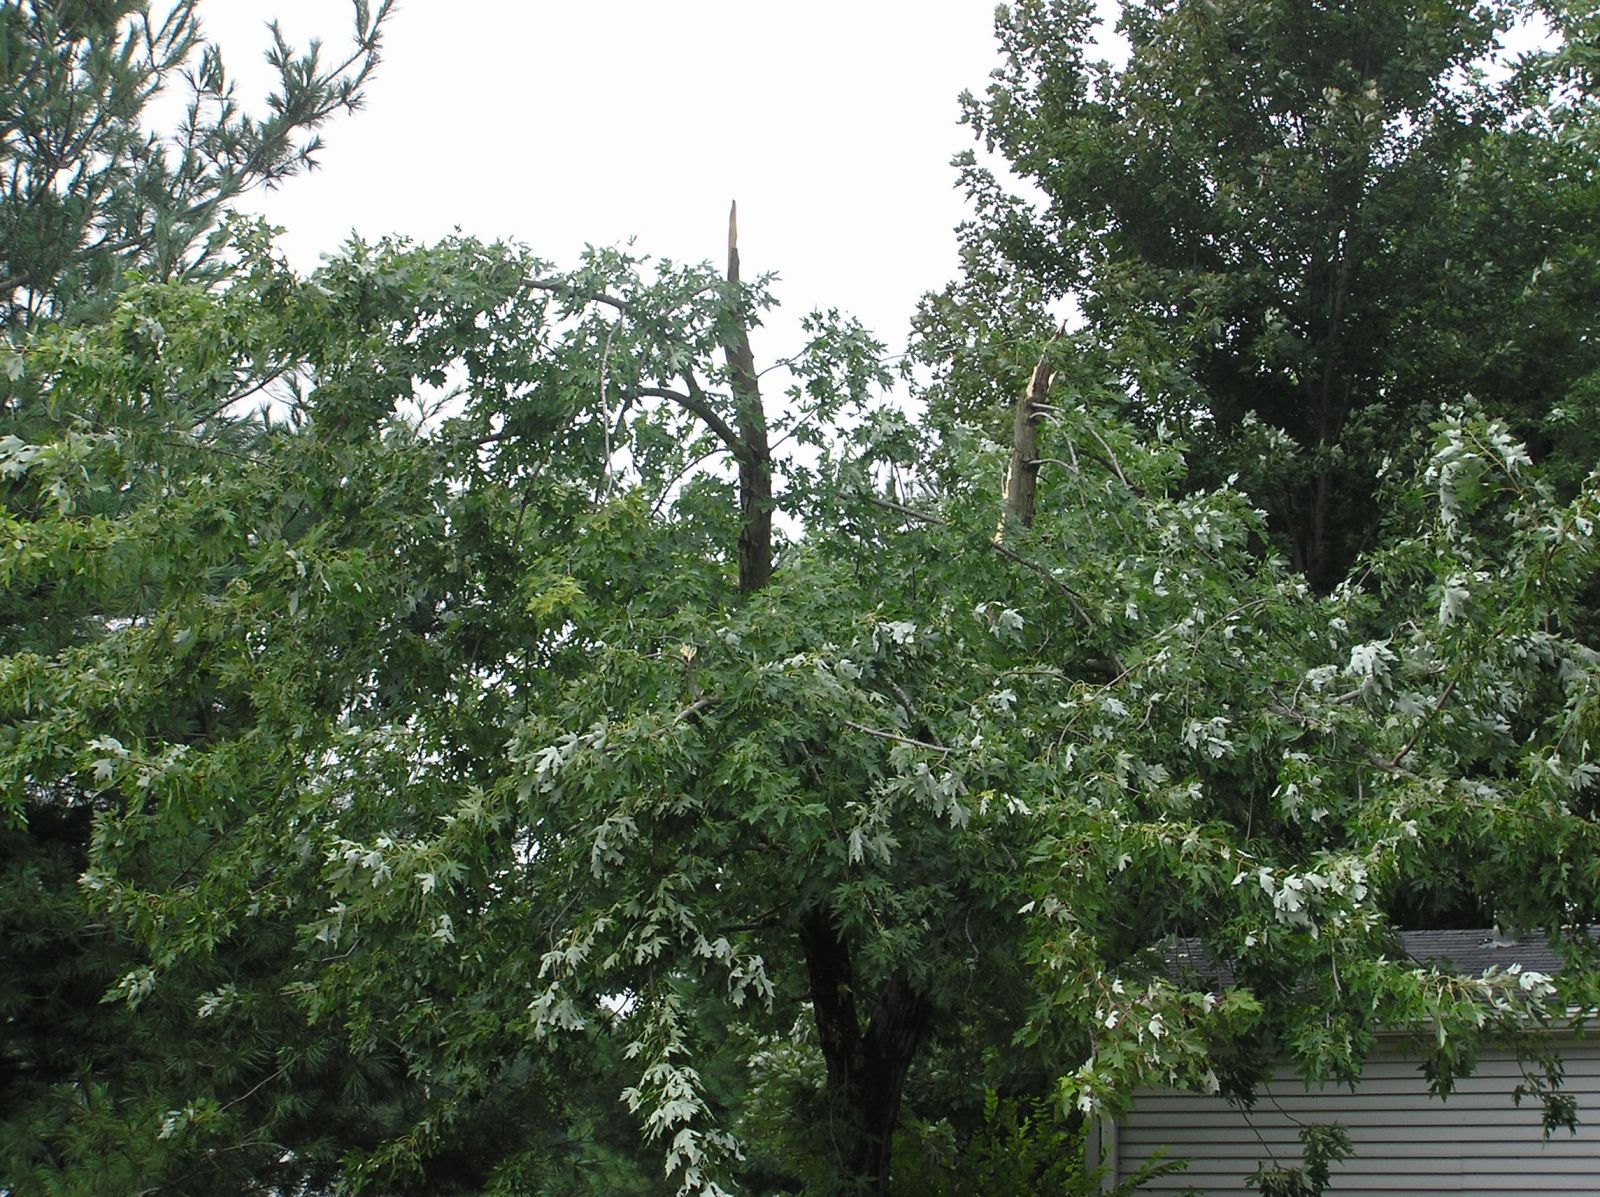 Multiple trees with sheared branches at the top